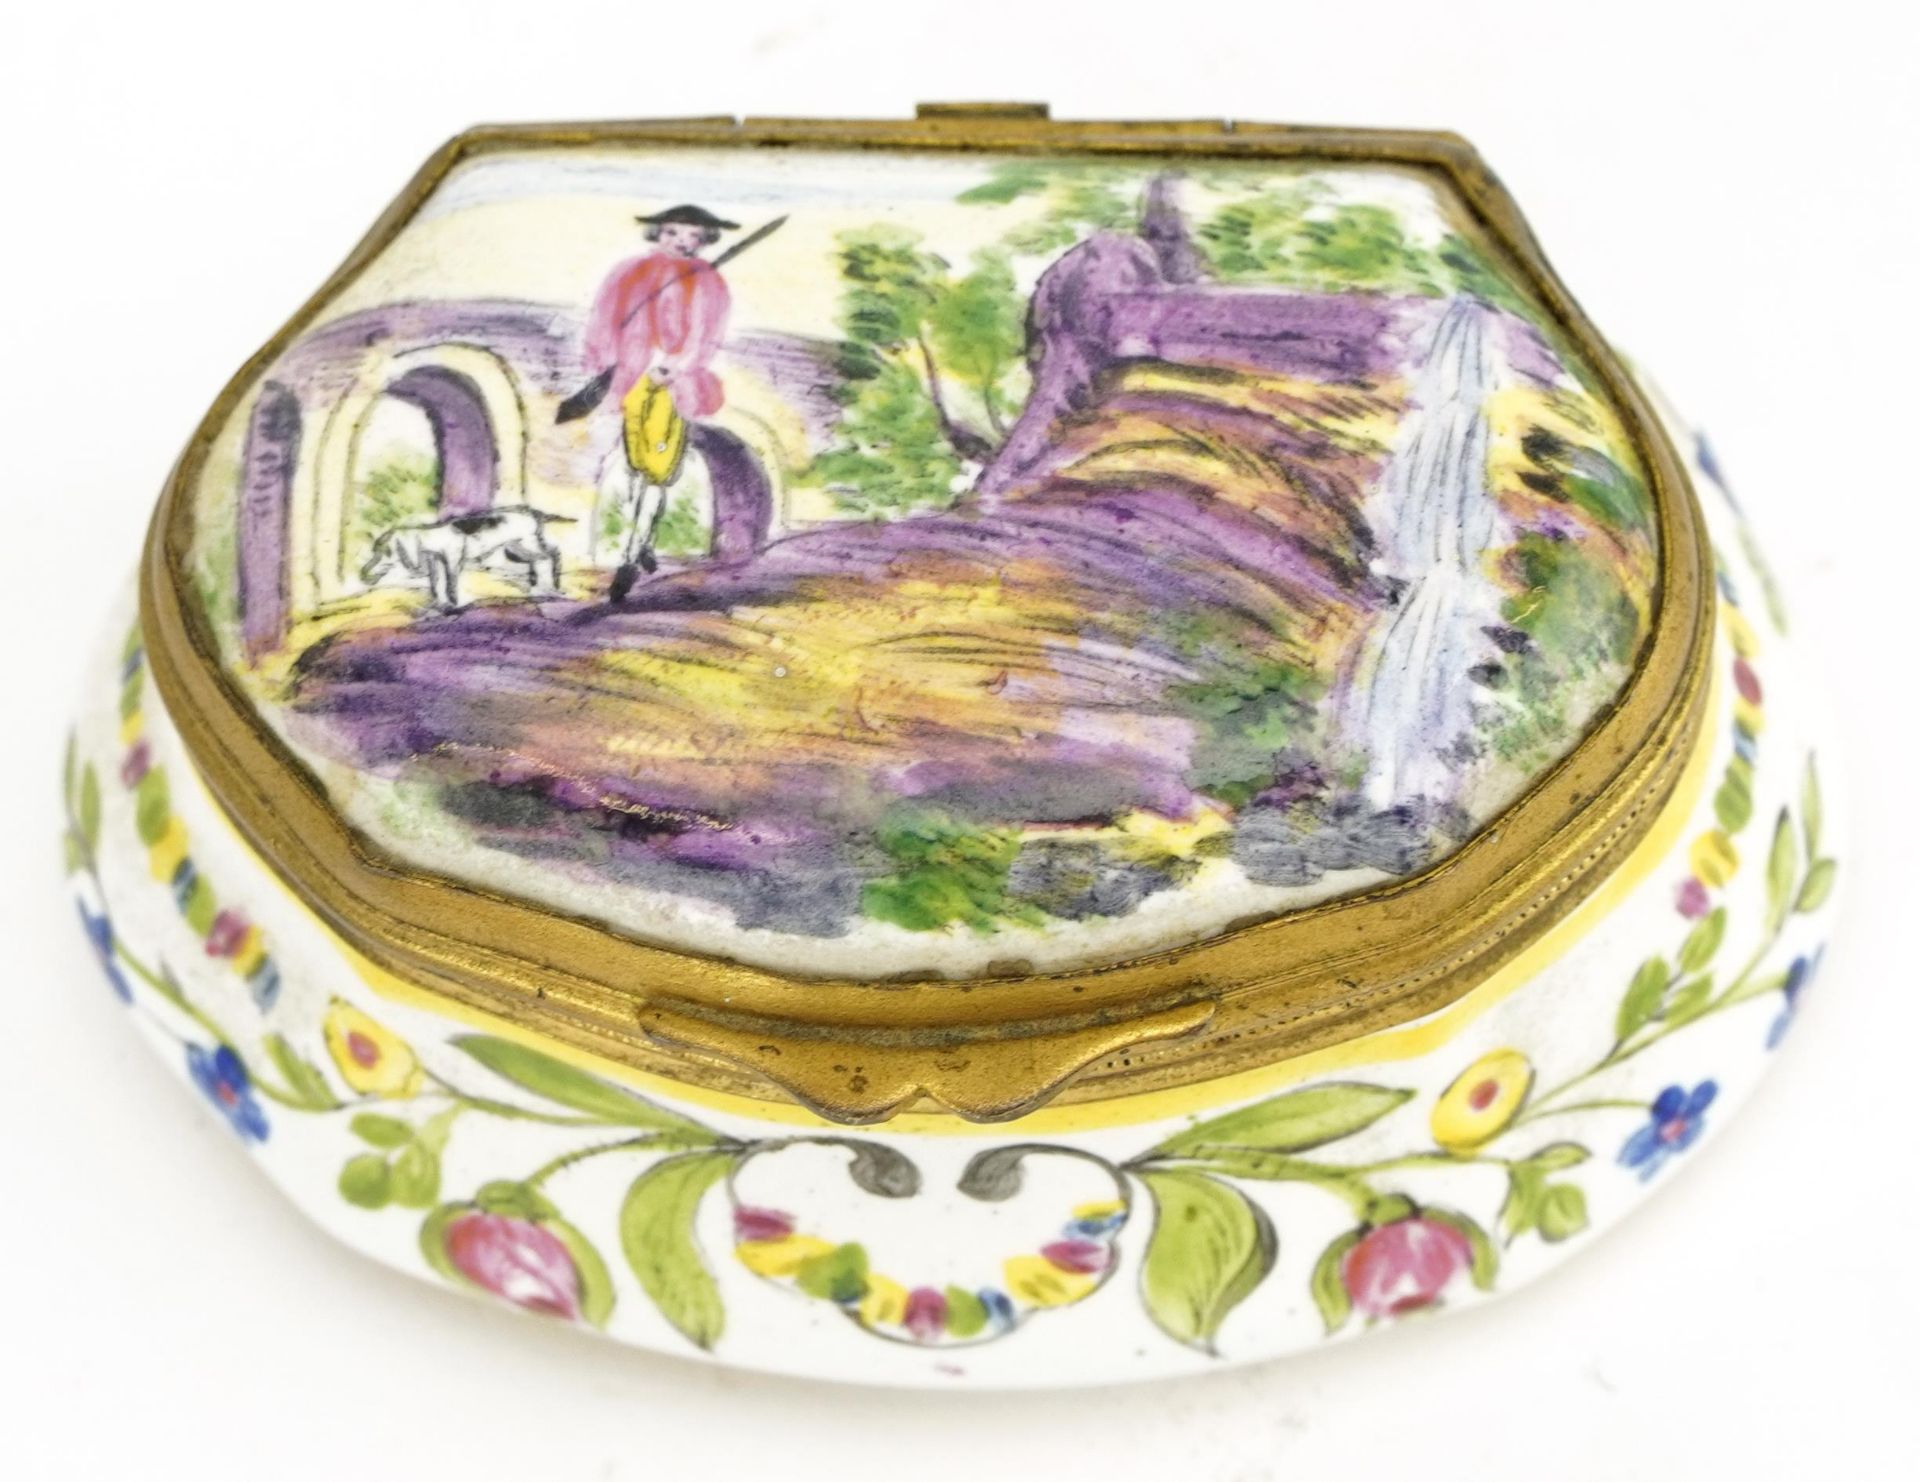 19th century European faience glazed patch box hand painted with a figure with dog and flowers, - Image 2 of 5